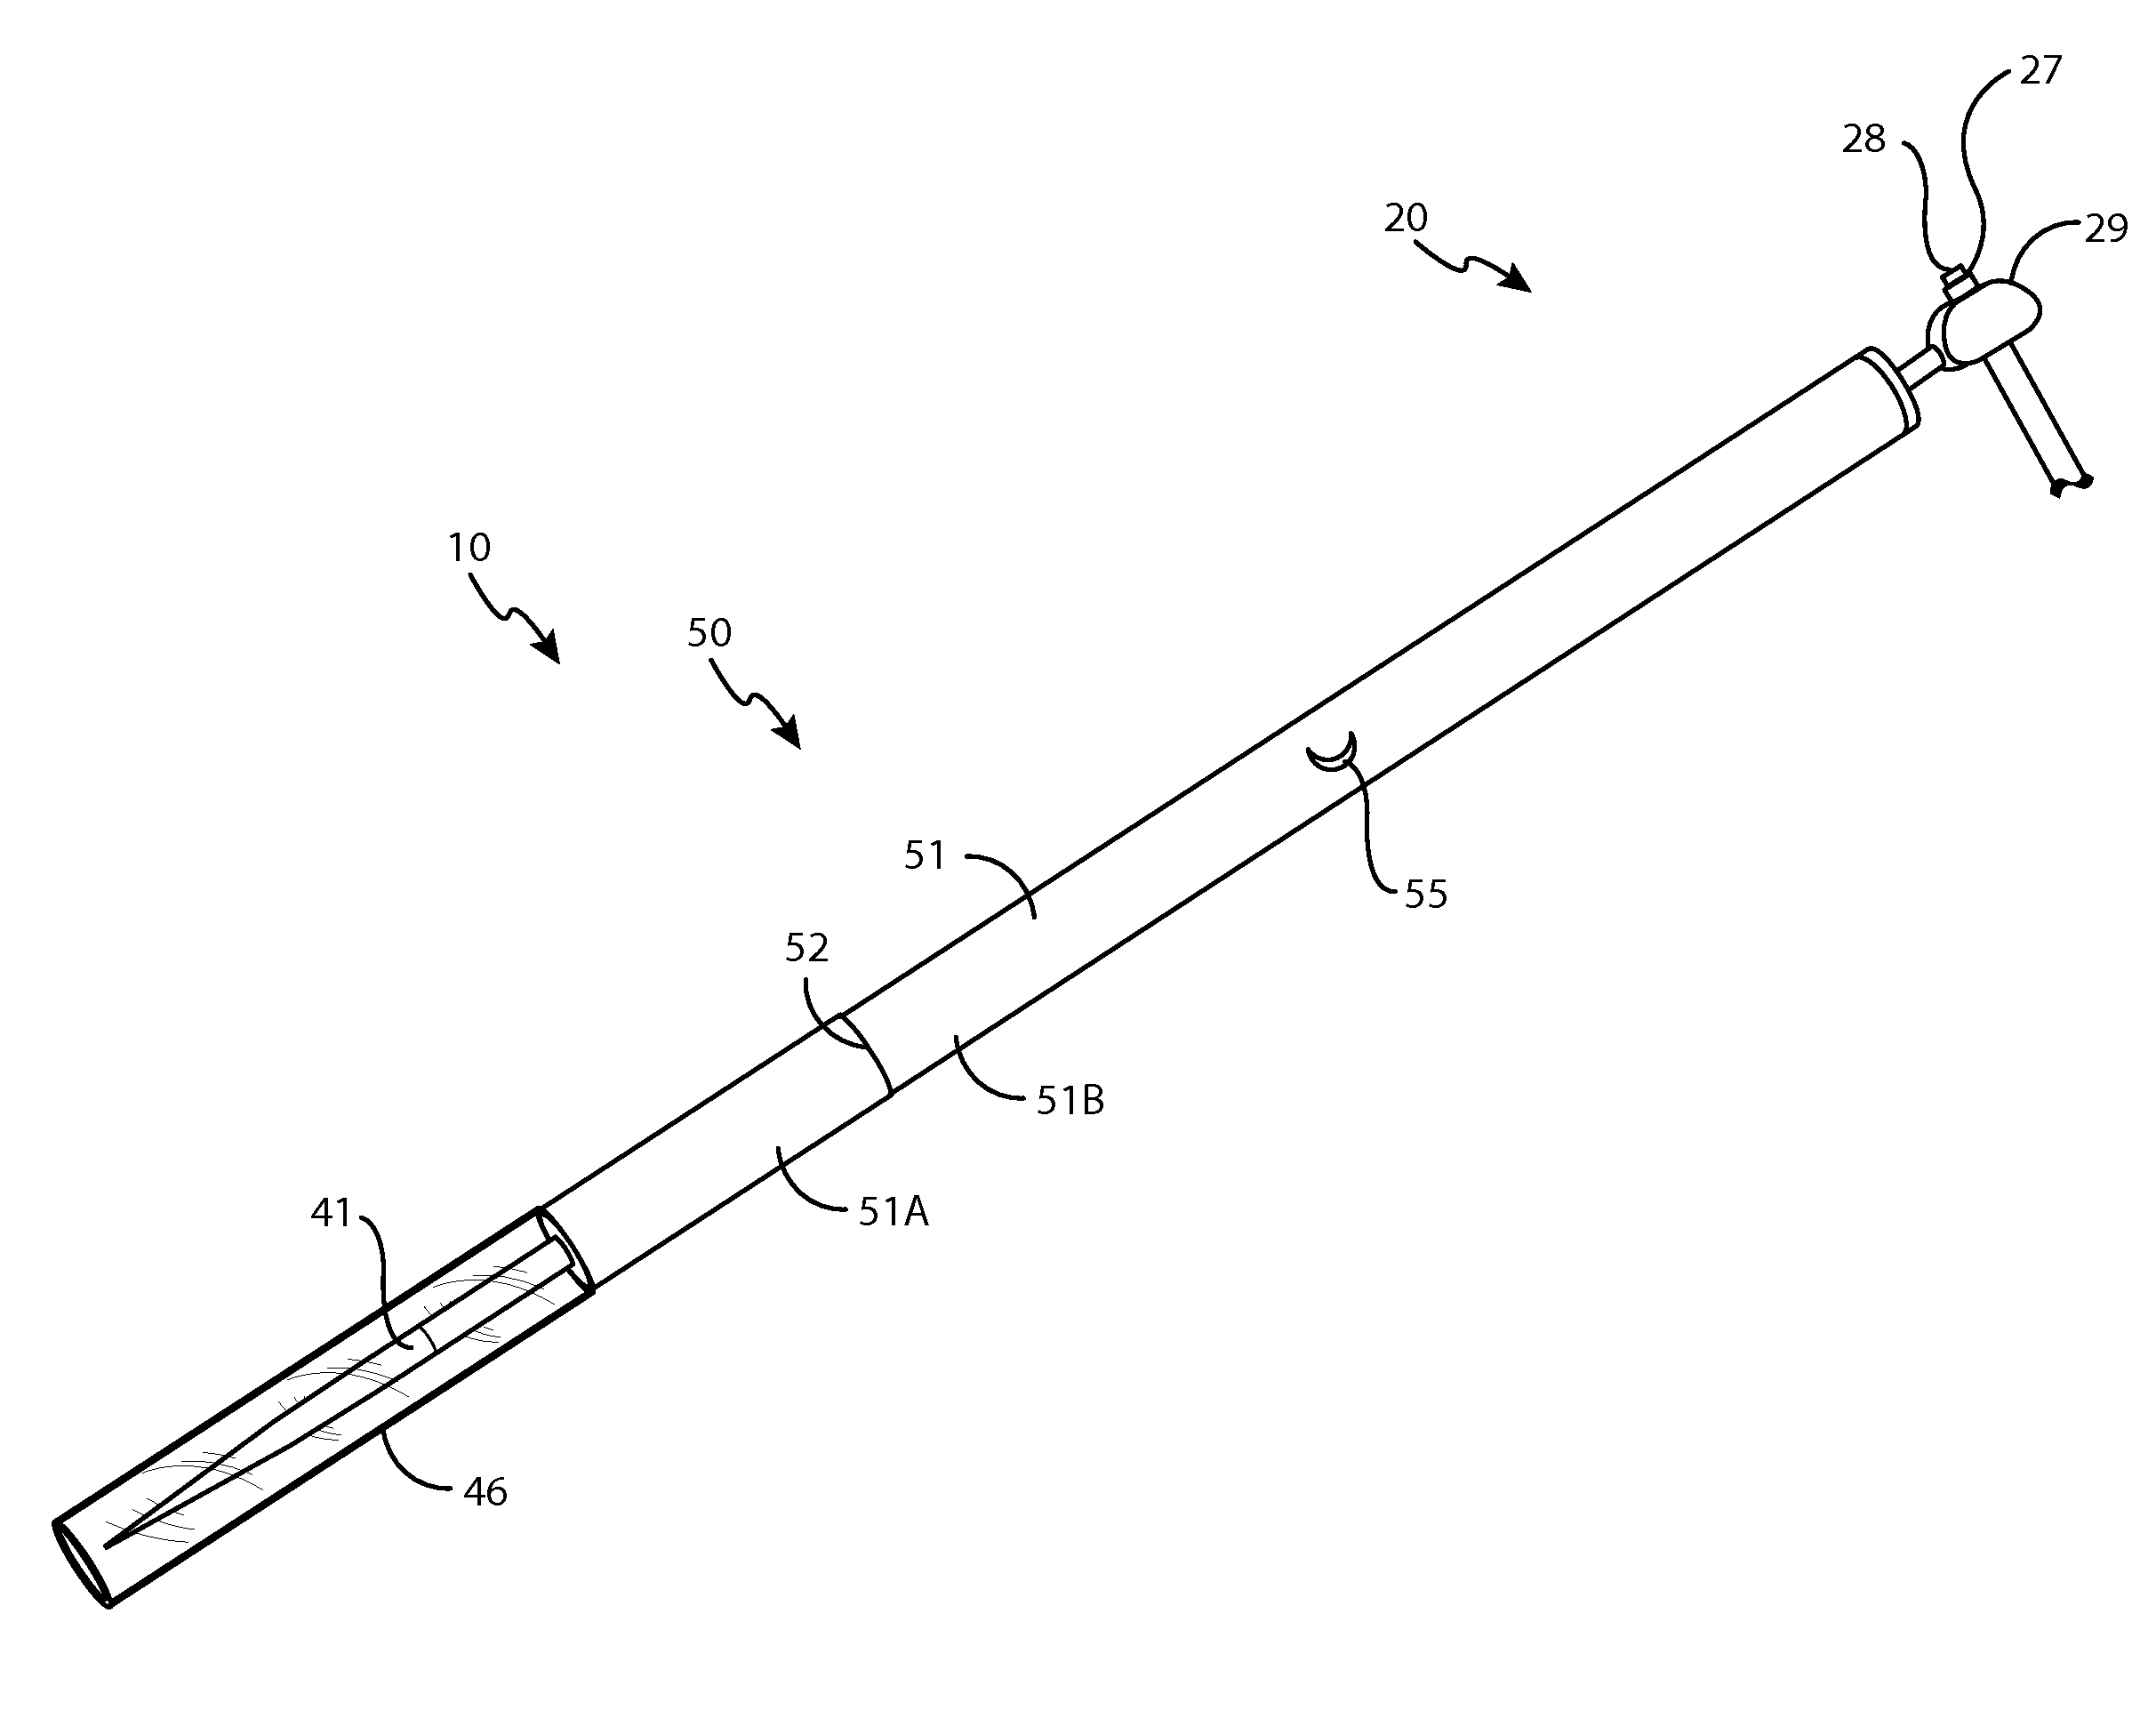 Rapid-firing spear gun with retained projectile